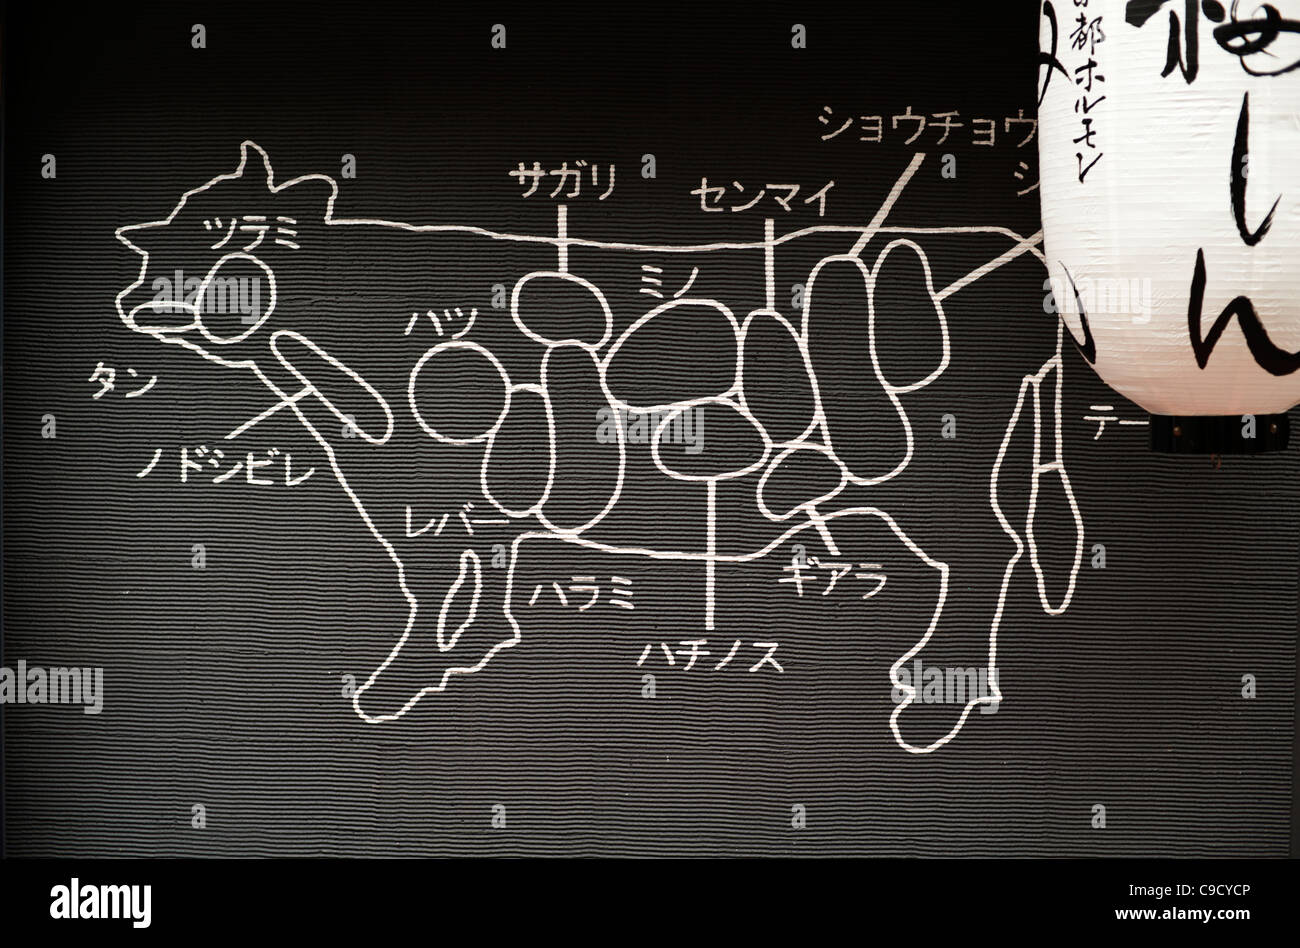 Beef restaurant sign, showing the different cuts of meat,  Kyoto, Japan Stock Photo